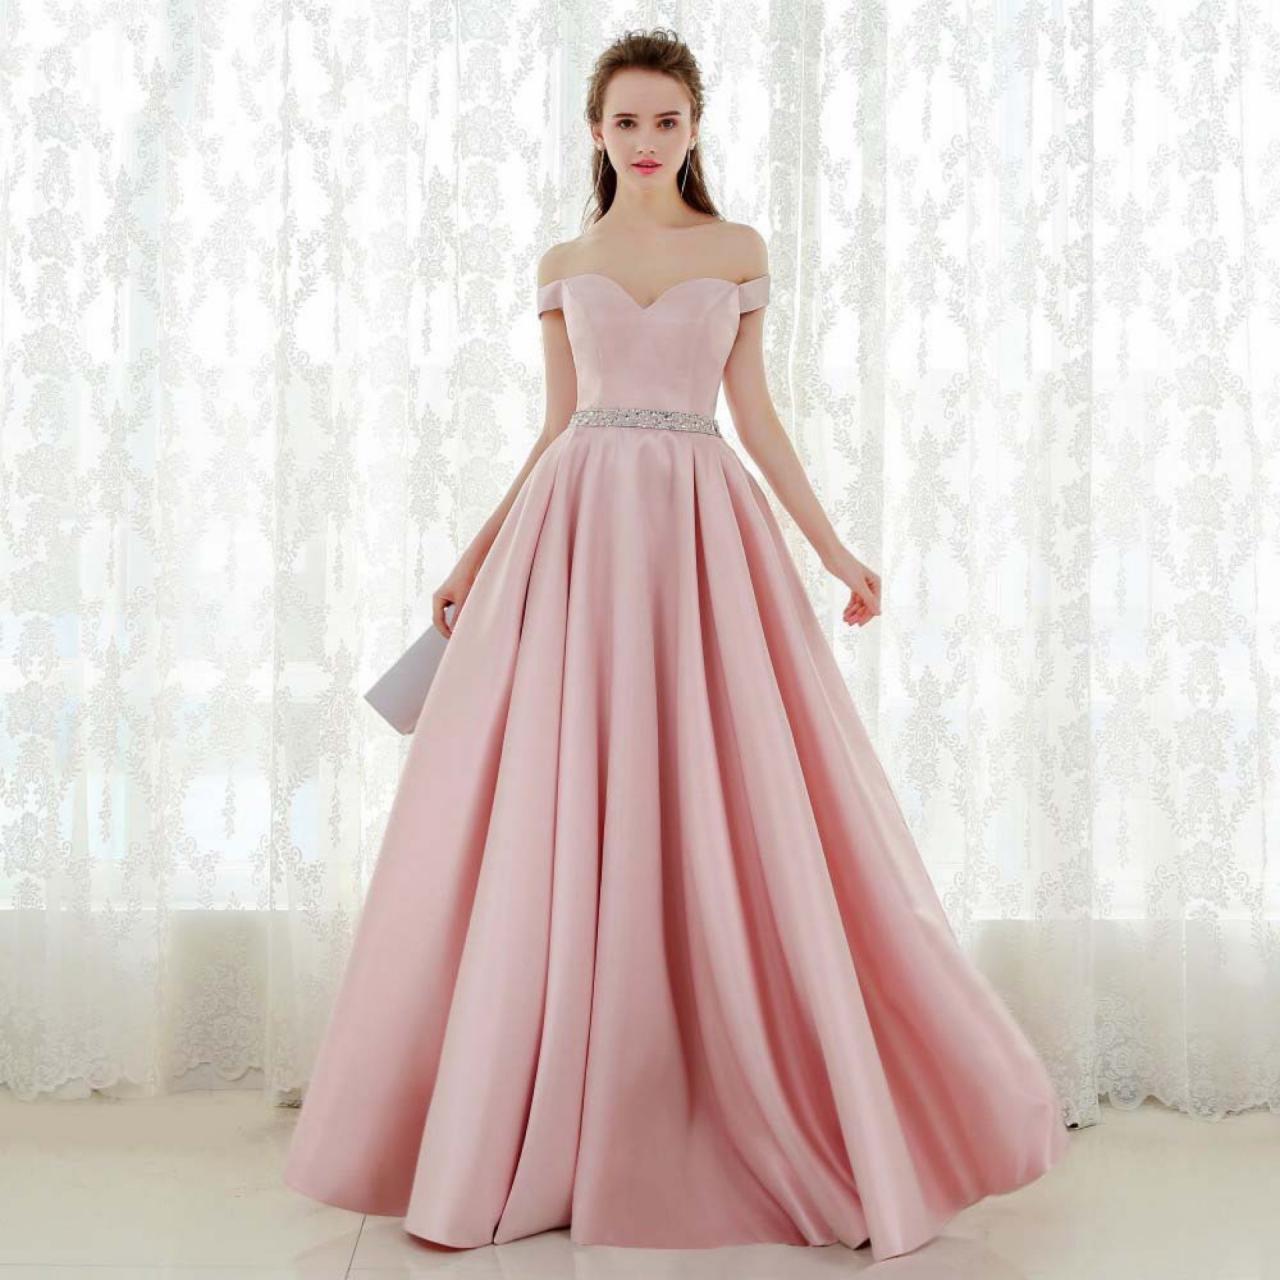 Pink Bridesmaid Dress Off Shoulder Length V-neck Prom Dress Satin Evening Dress With Slimming Belly Wedding Banquet Dress With Beaded